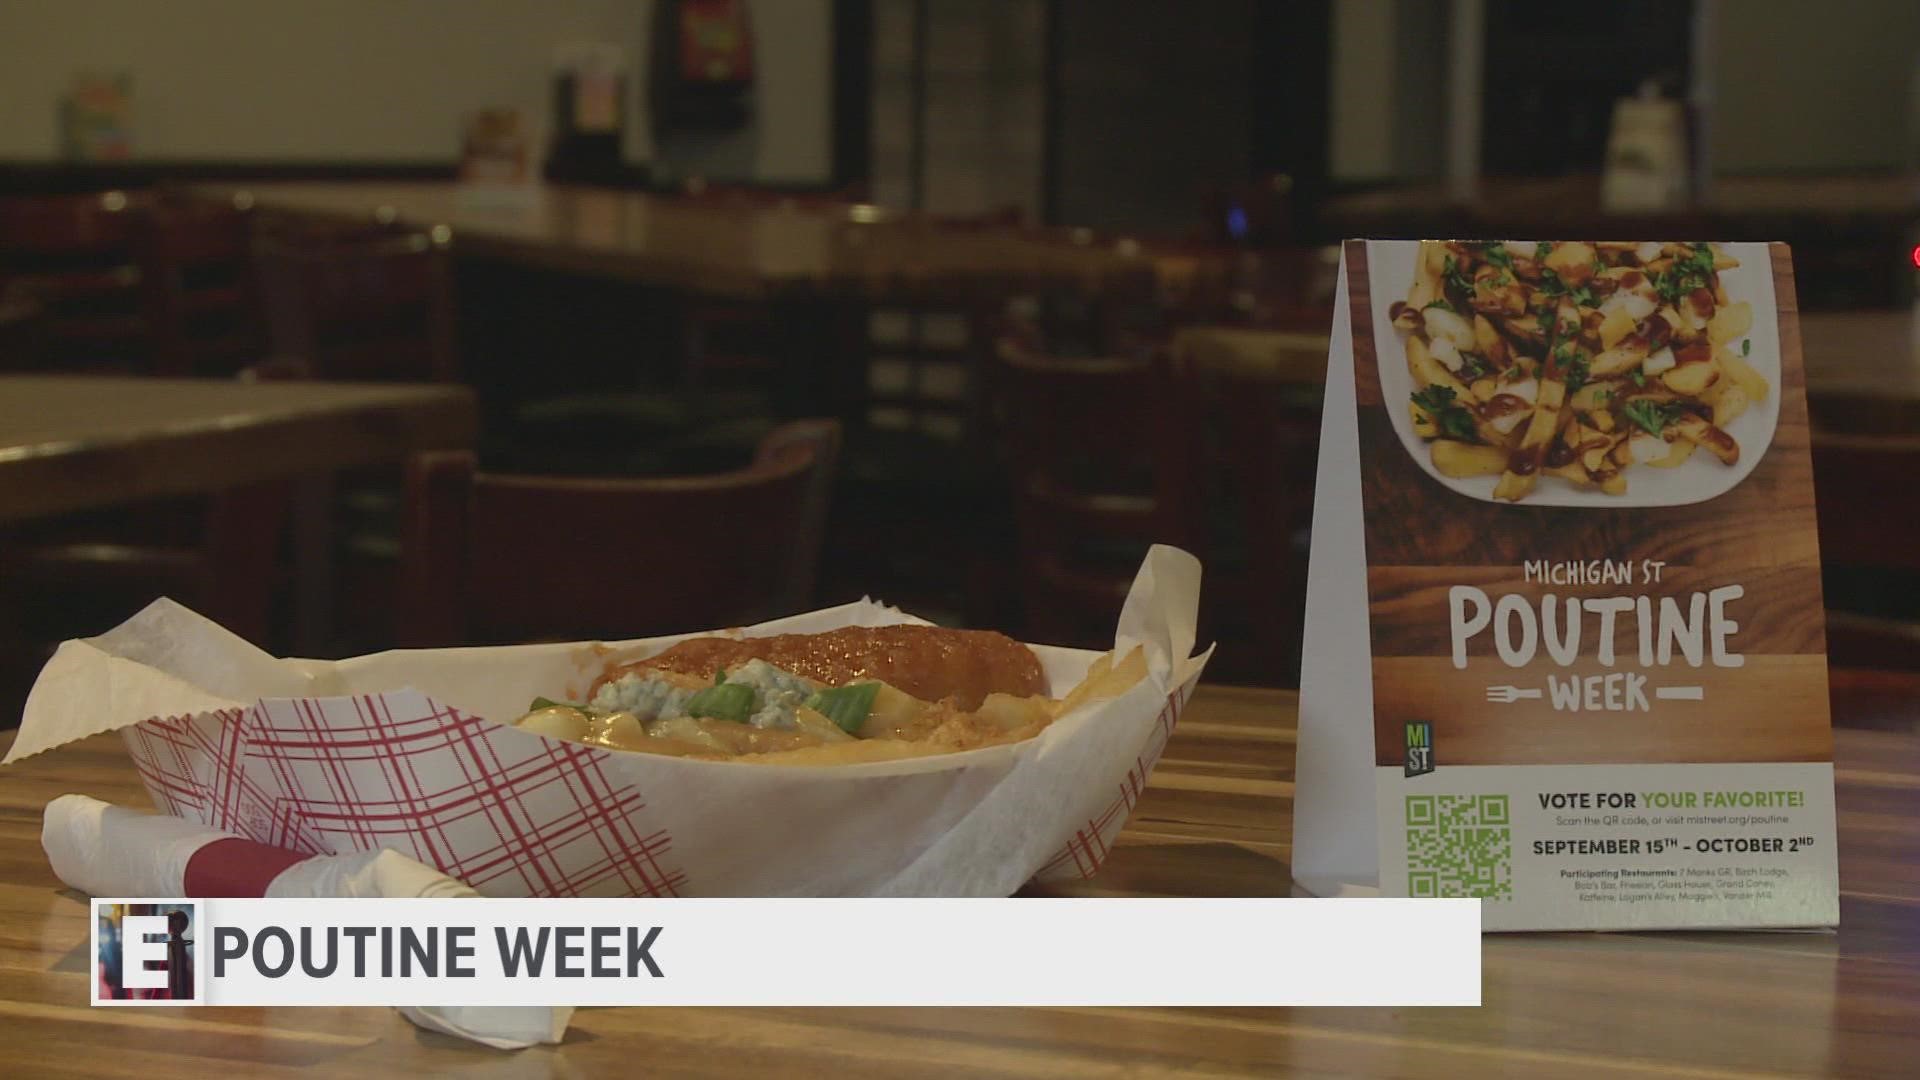 Hope you are hungry! Because Poutine Week has returned to Grand Rapids along Michigan Street.